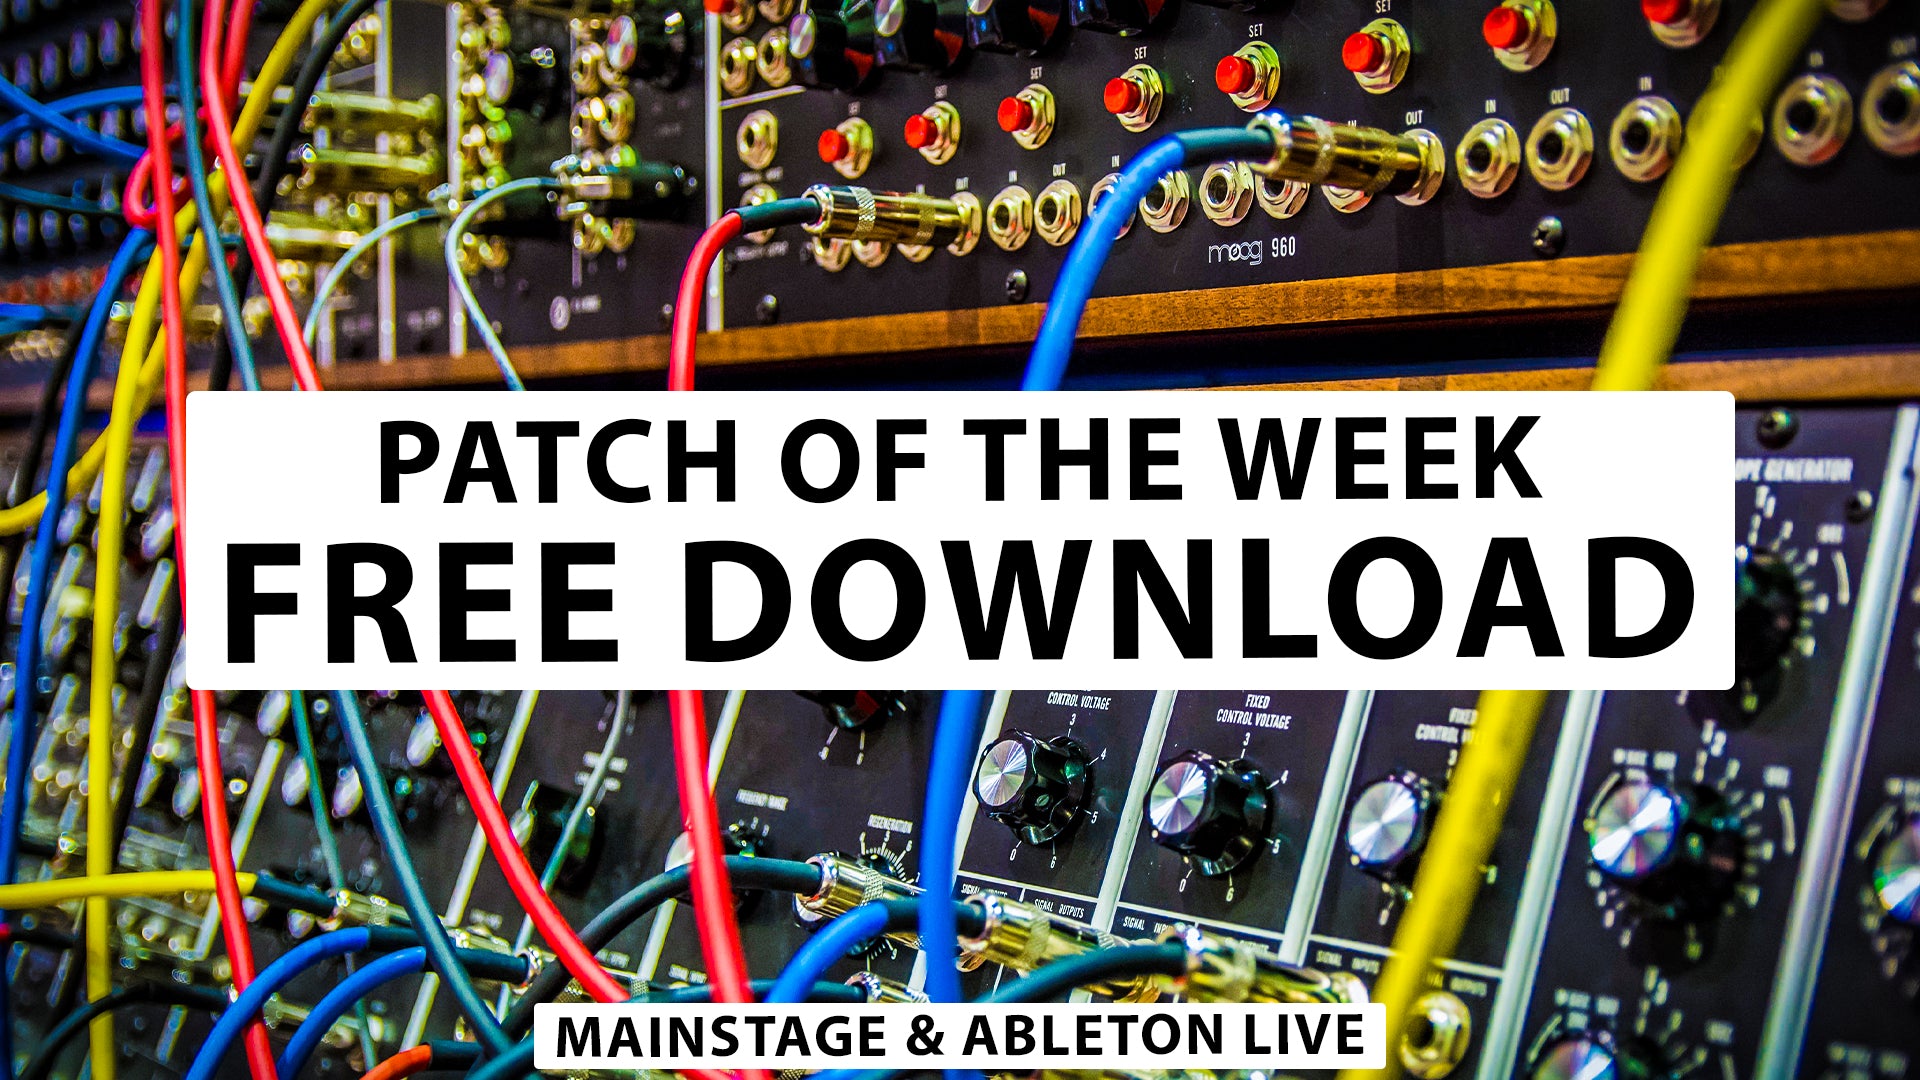 Touchstone Piano - Free MainStage & Ableton Worship Patch!